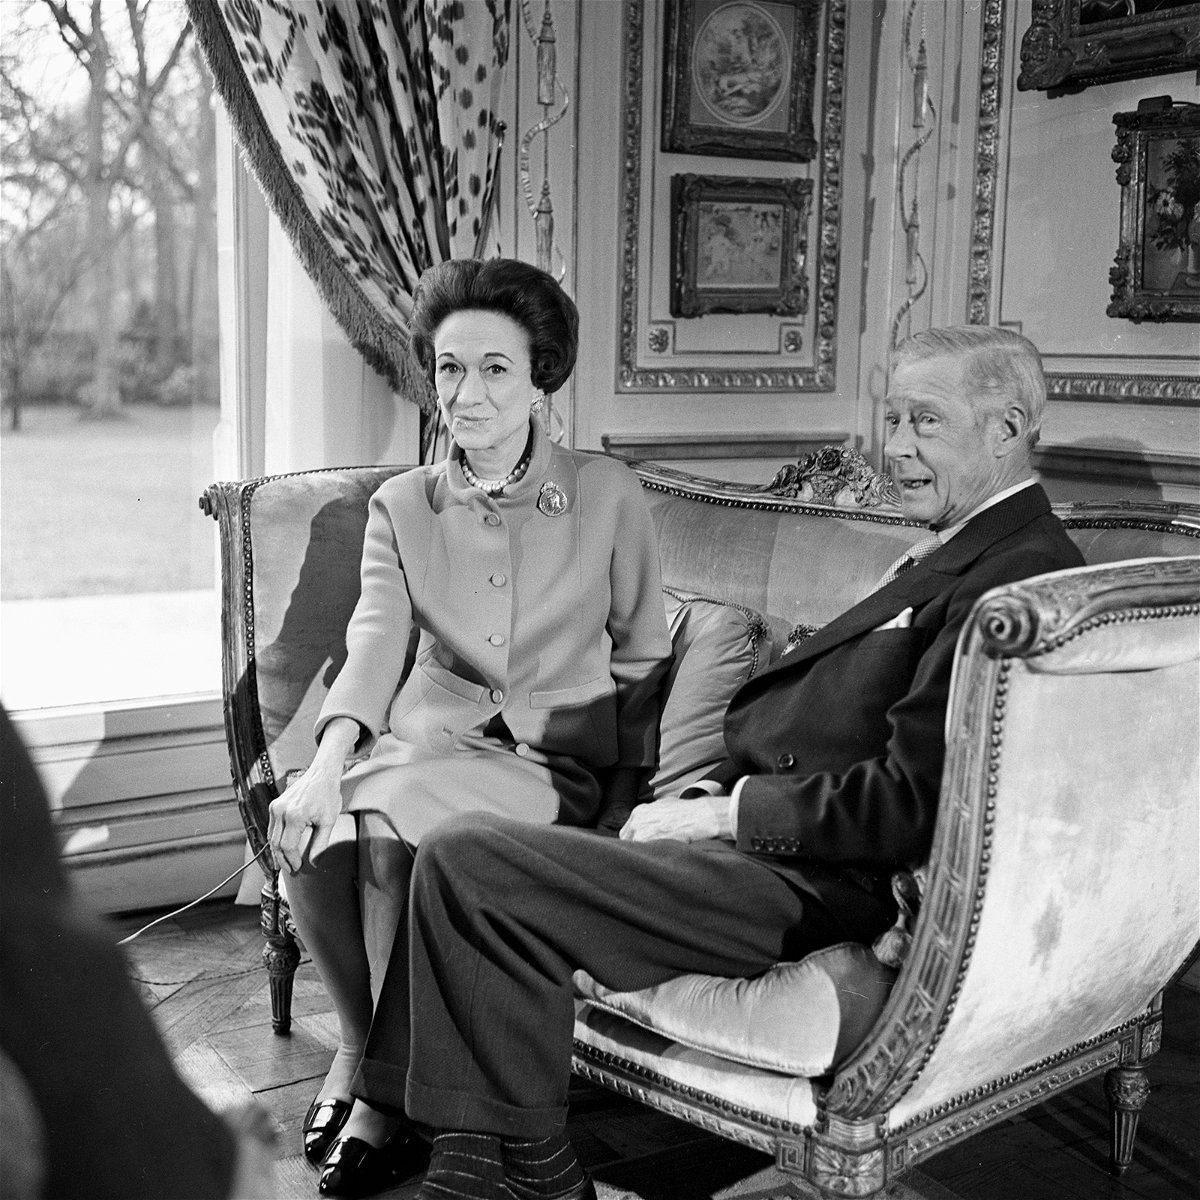 French home of Edward VIII and Wallis Simpson to become a museum